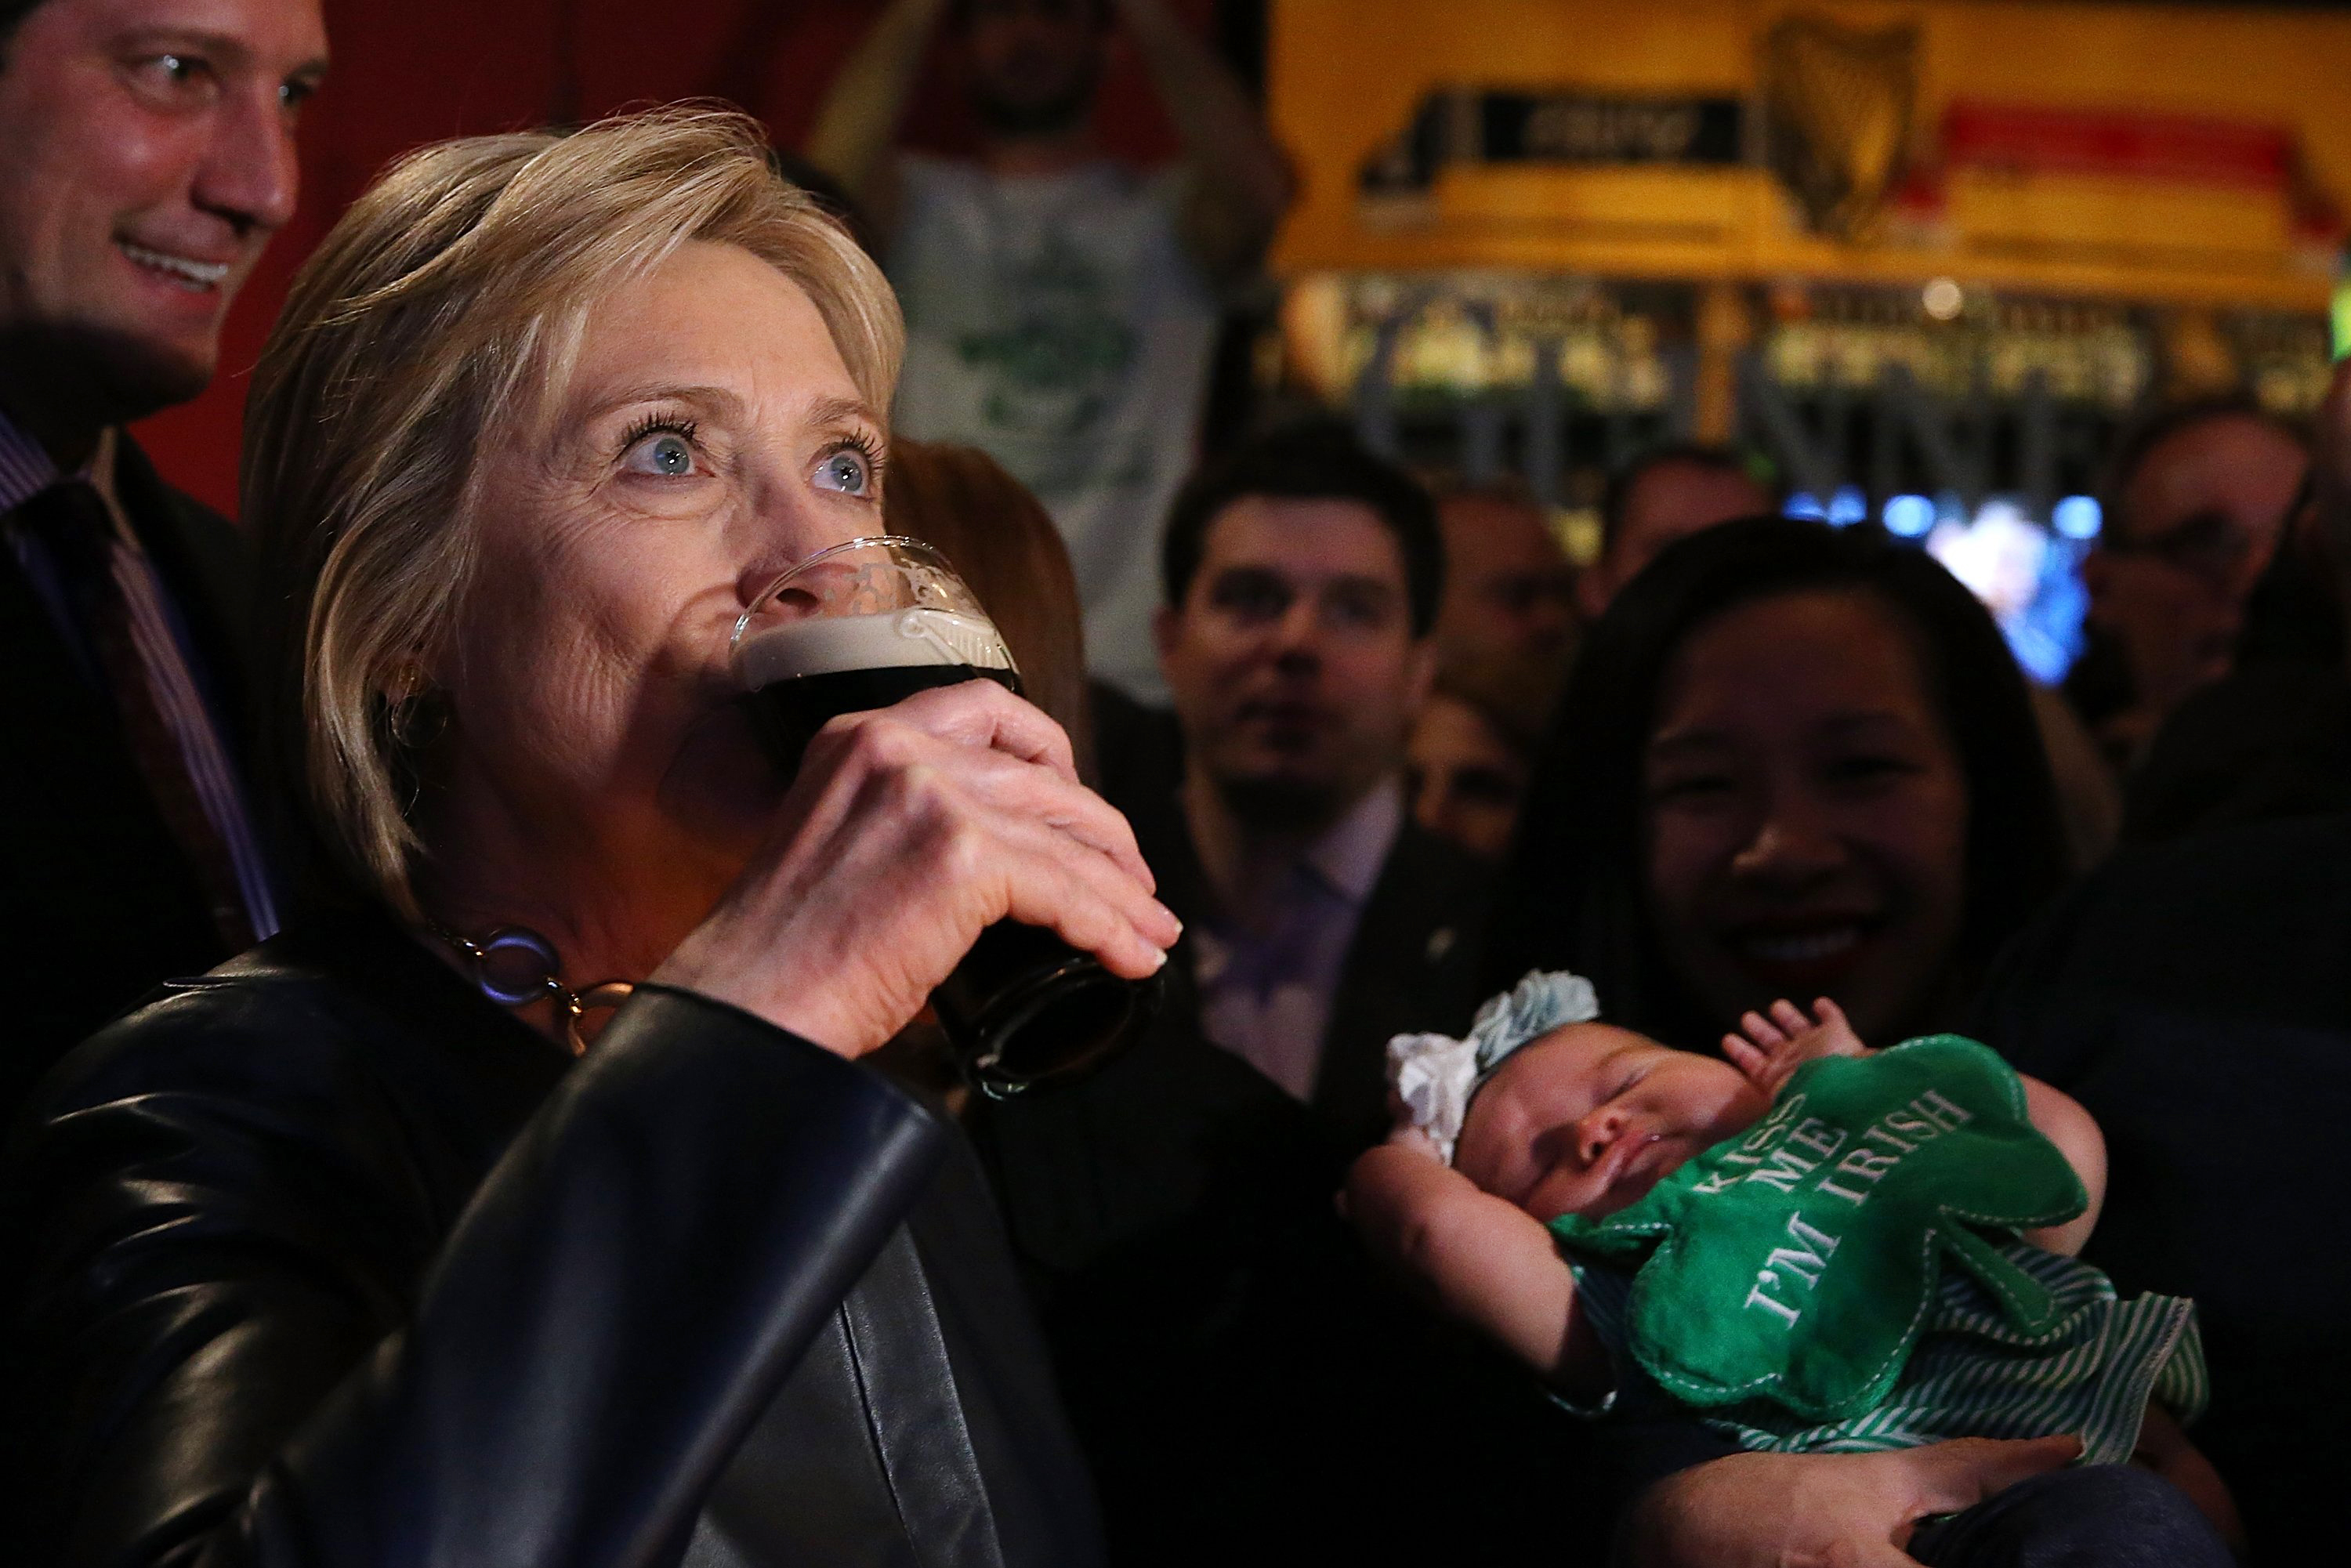 Democratic presidential candidate, former Secretary of State Hillary Clinton drinks a pint of Guinness beer at O'Donold's Irish Pub and Grill on March 12, 2016 in Youngstown, Ohio.